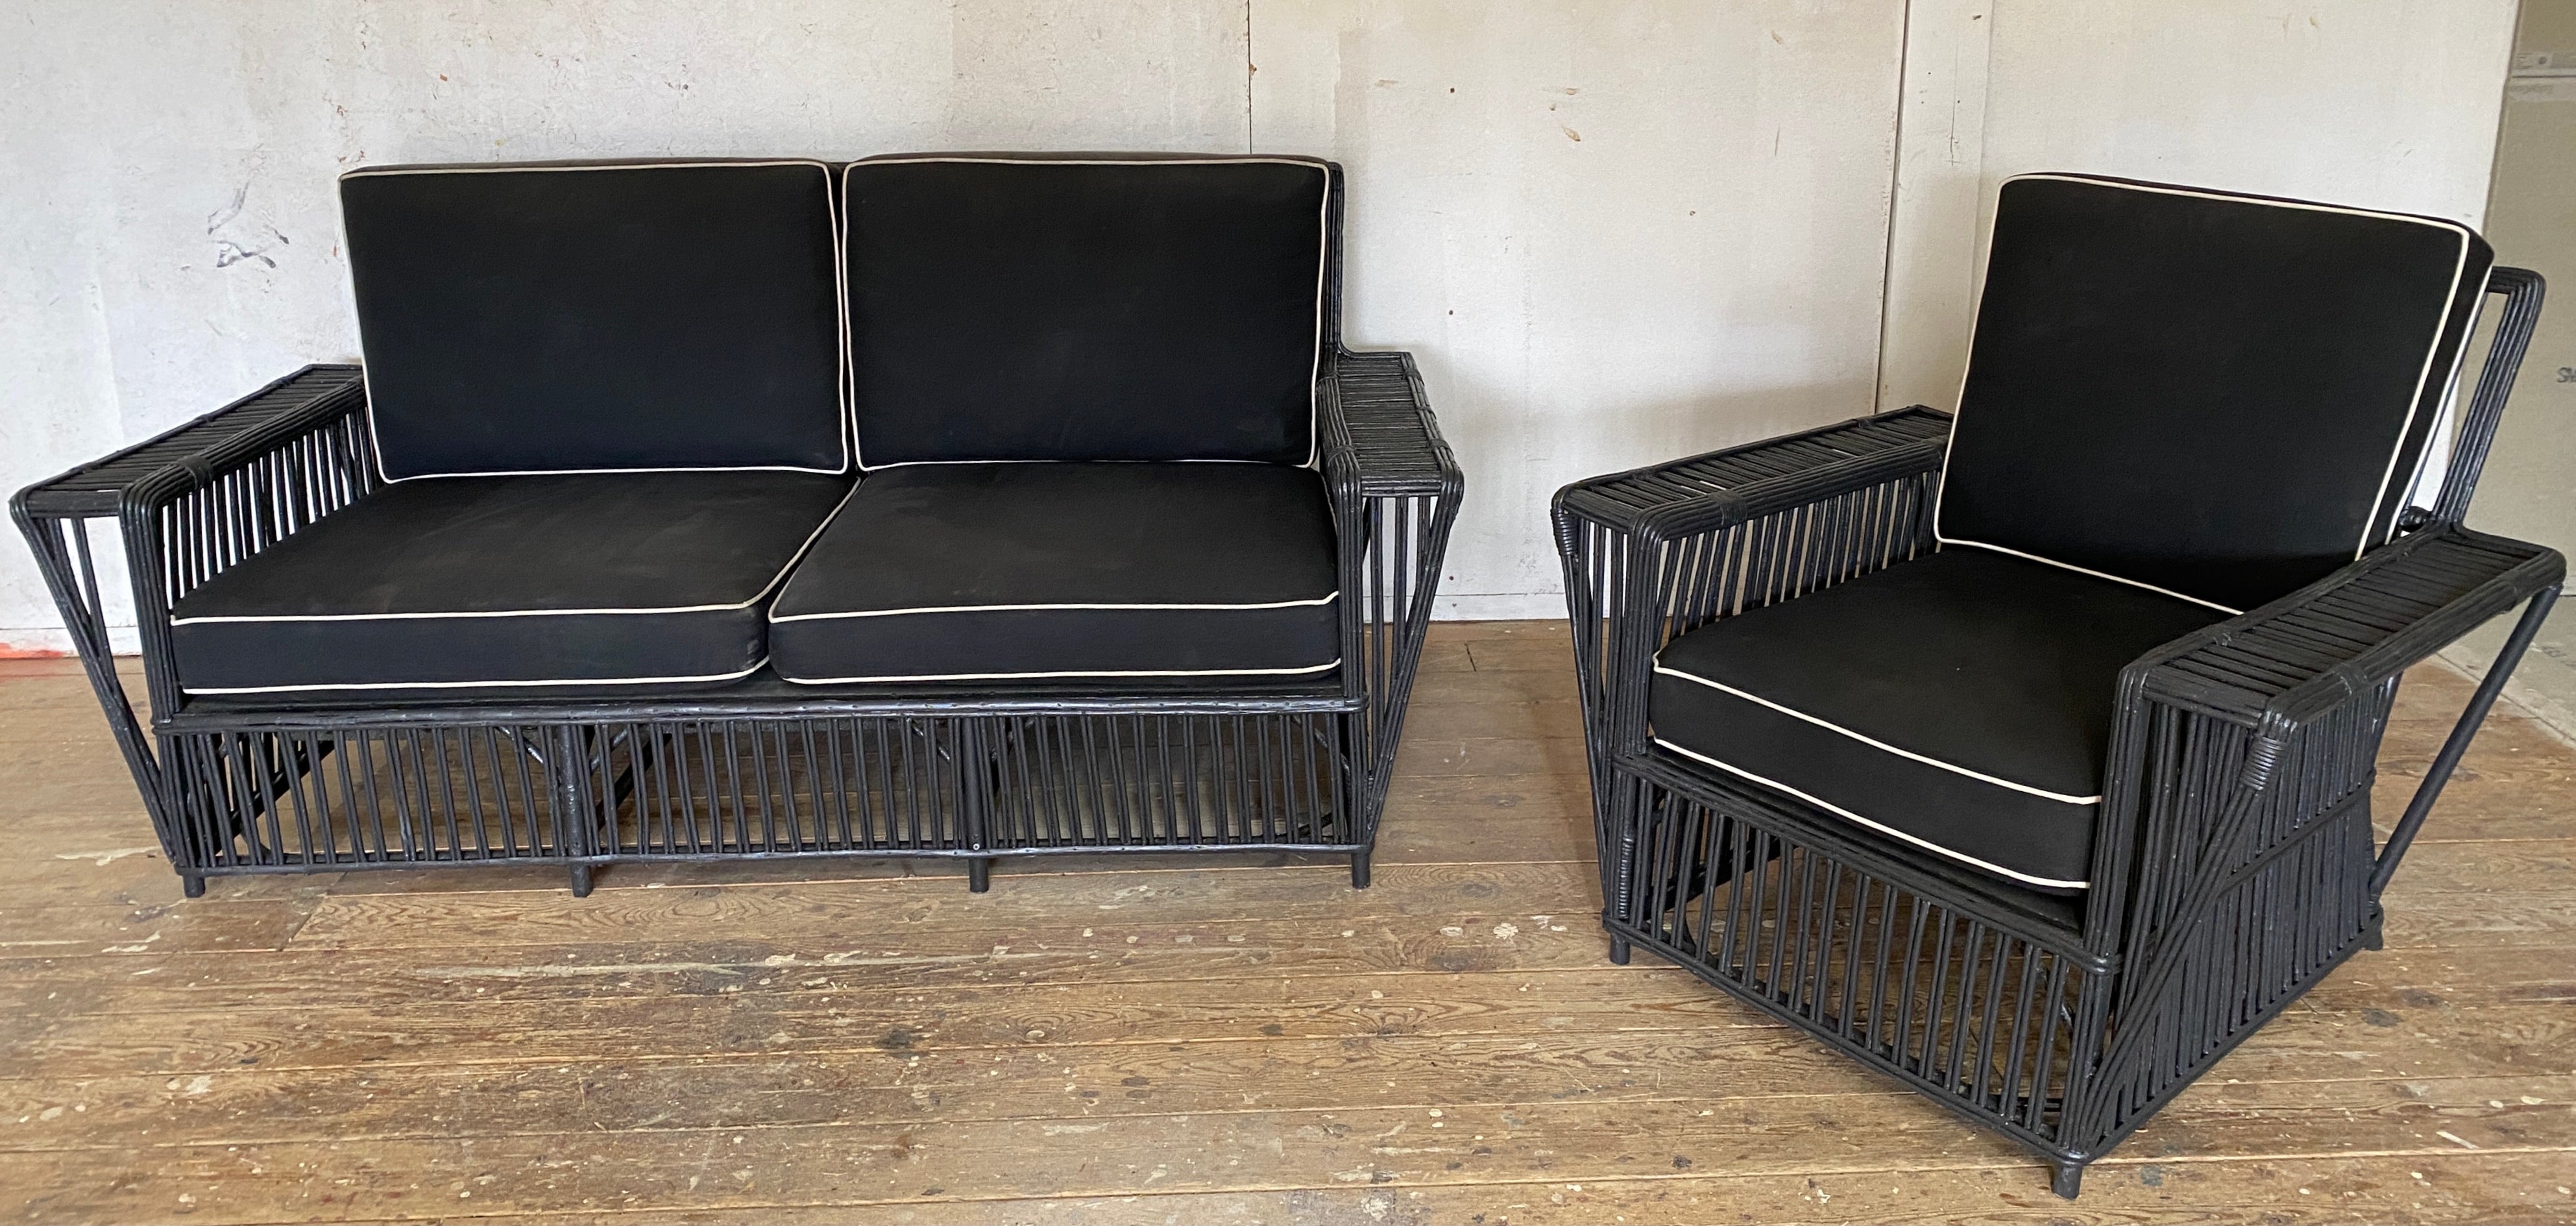 Stylish 1940's Stick Wicker / split reed sofa and armchair, deep-seated, angular with wide flat arms giving the sofa and chair that graceful elegant look. The rattan settee and arm chair are newly re-painted in a soft black paint. Cushions are